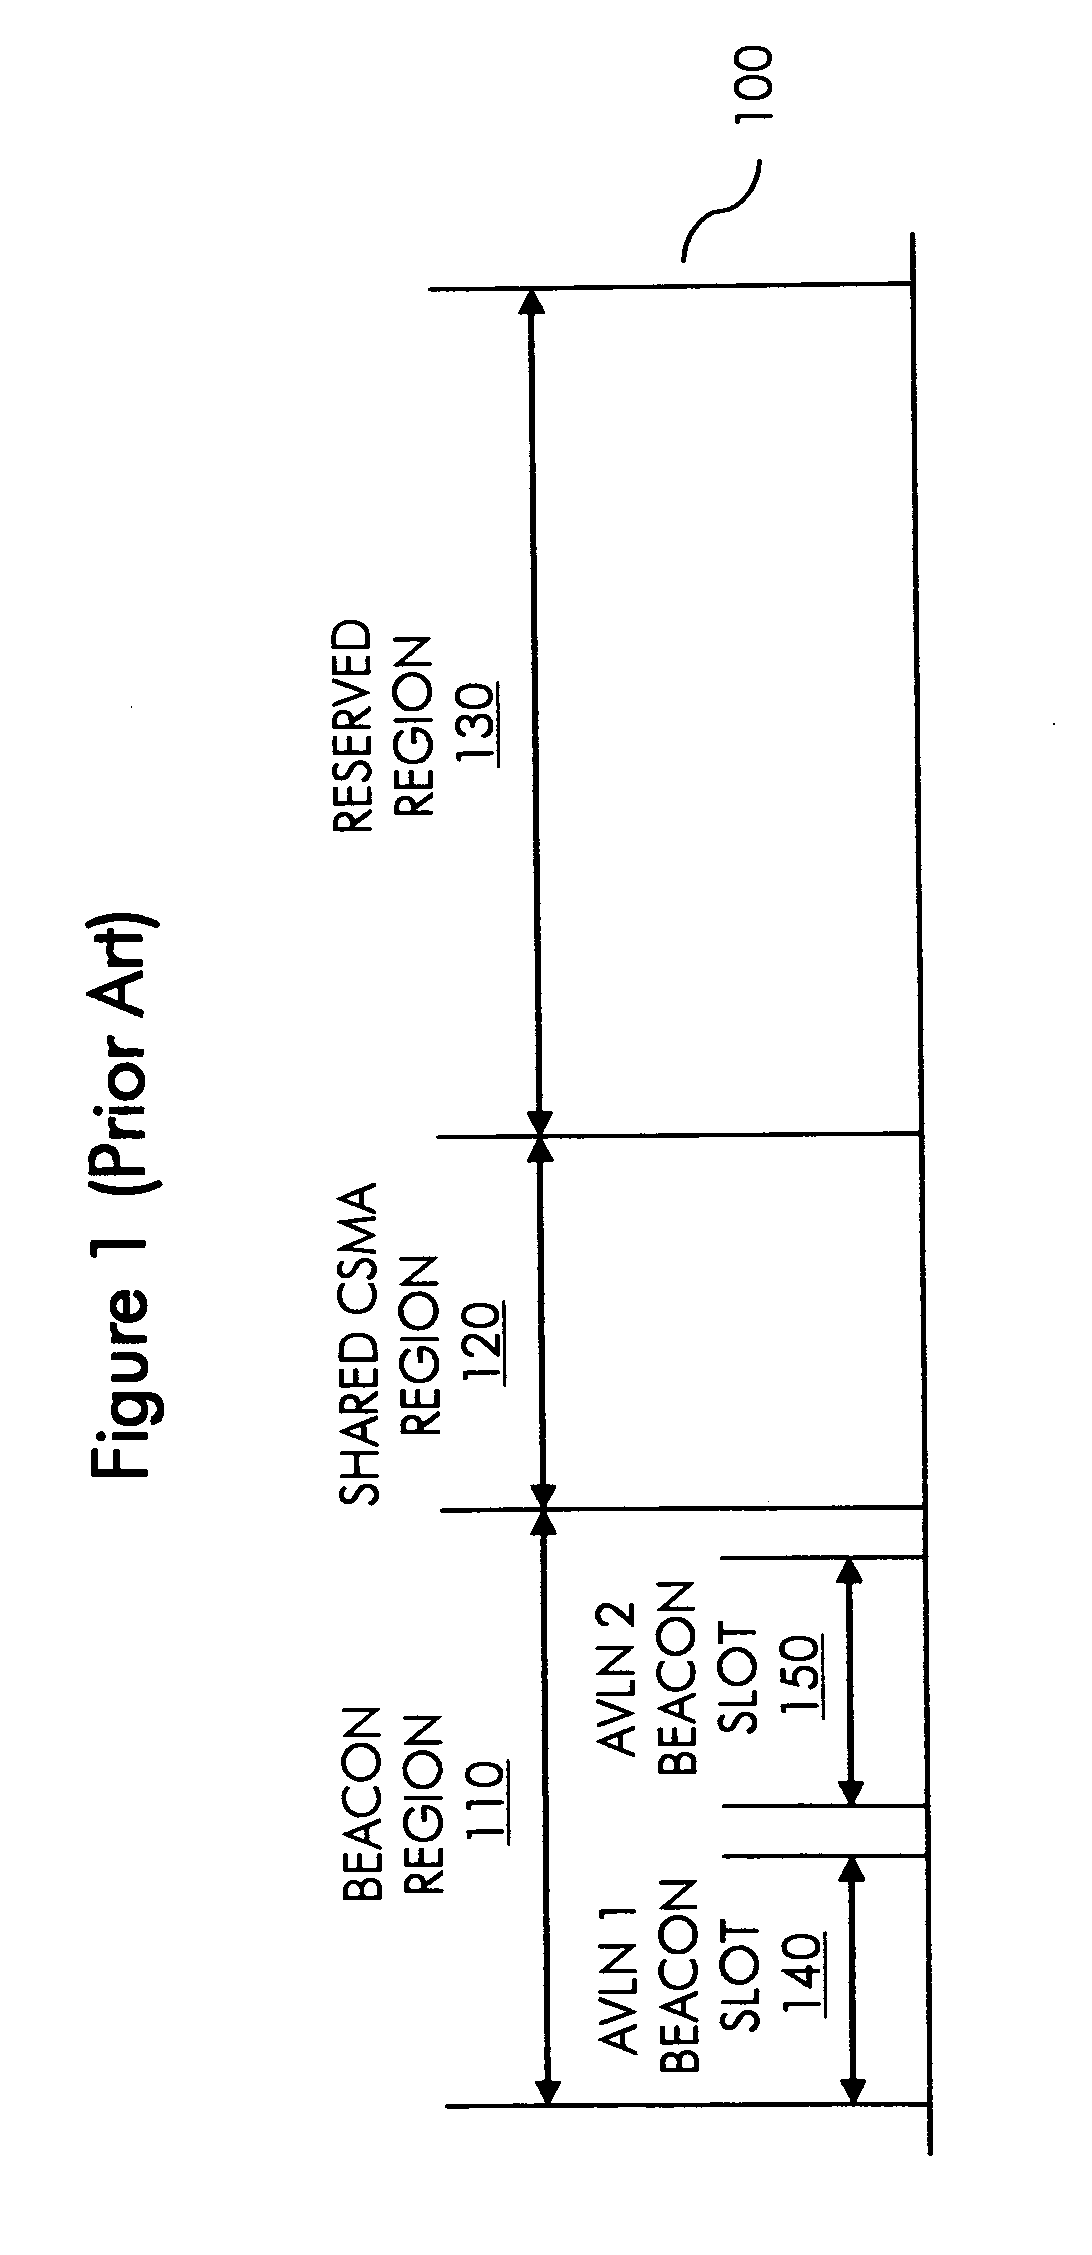 Method and system for conserving power in powerline network having multiple logical networks